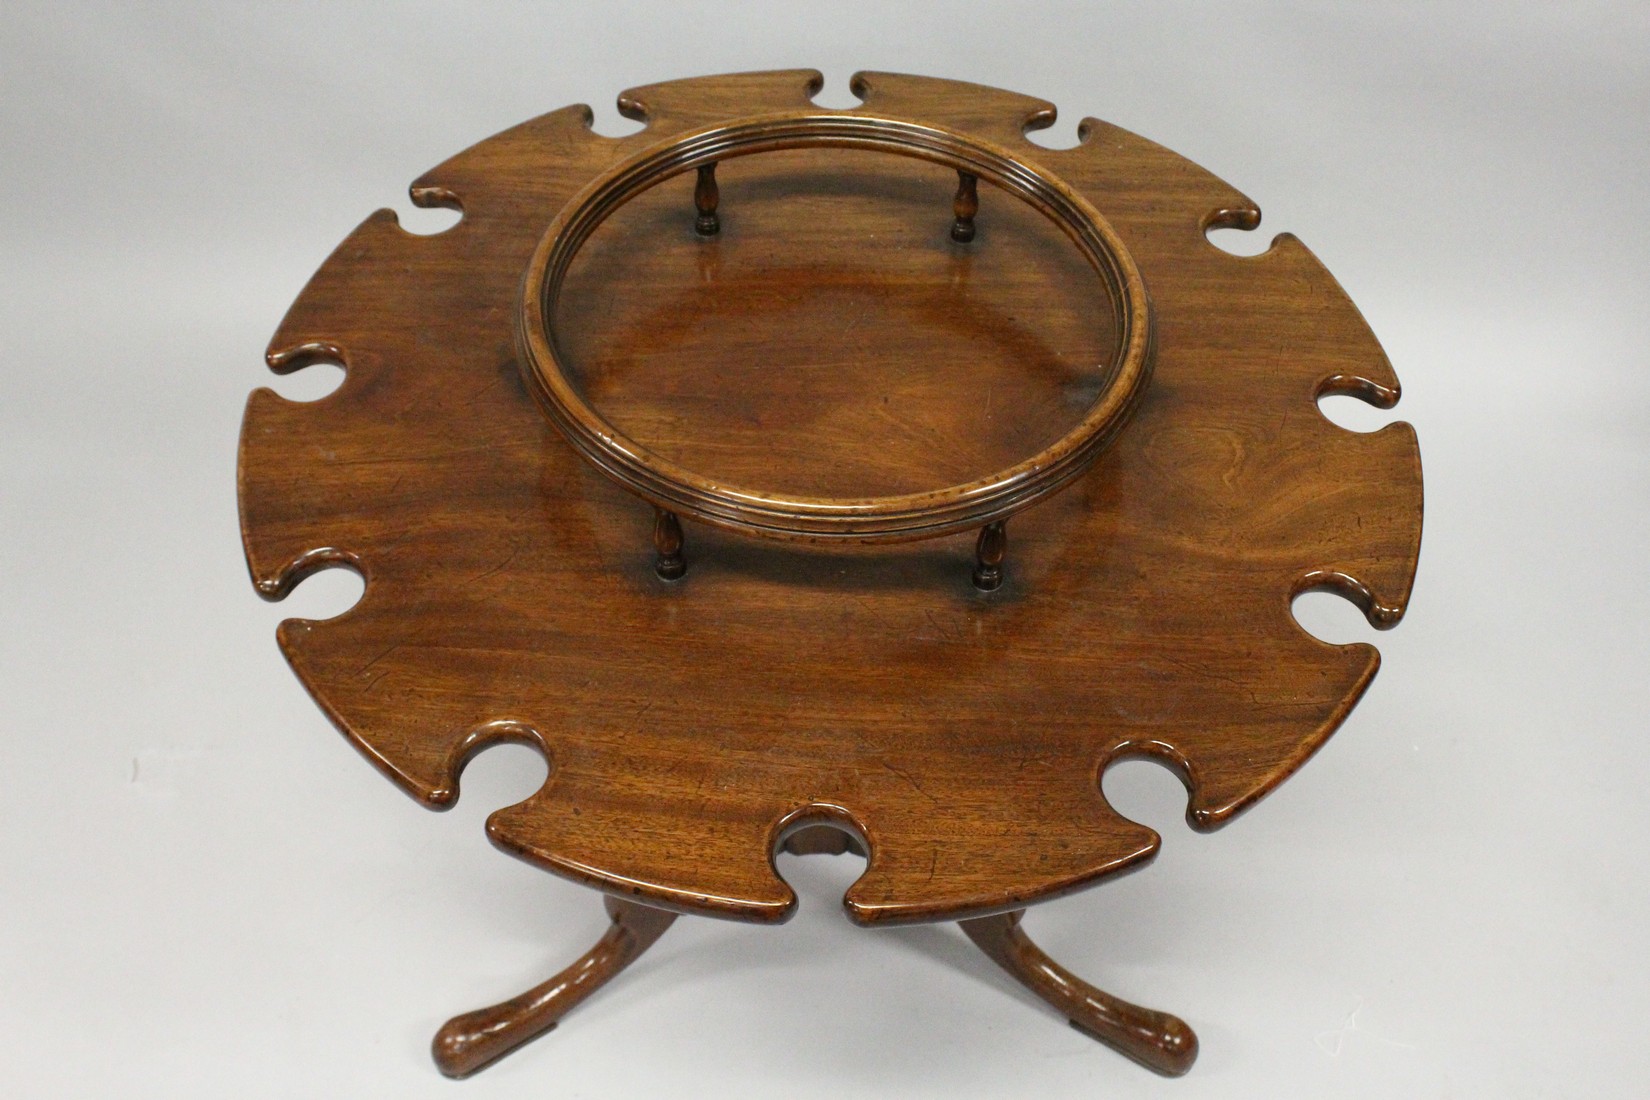 A GEORGE III STYLE MAHOGANY SHIP'S TRIPOD TABLE with centre section for bottles. The sides with - Image 2 of 6